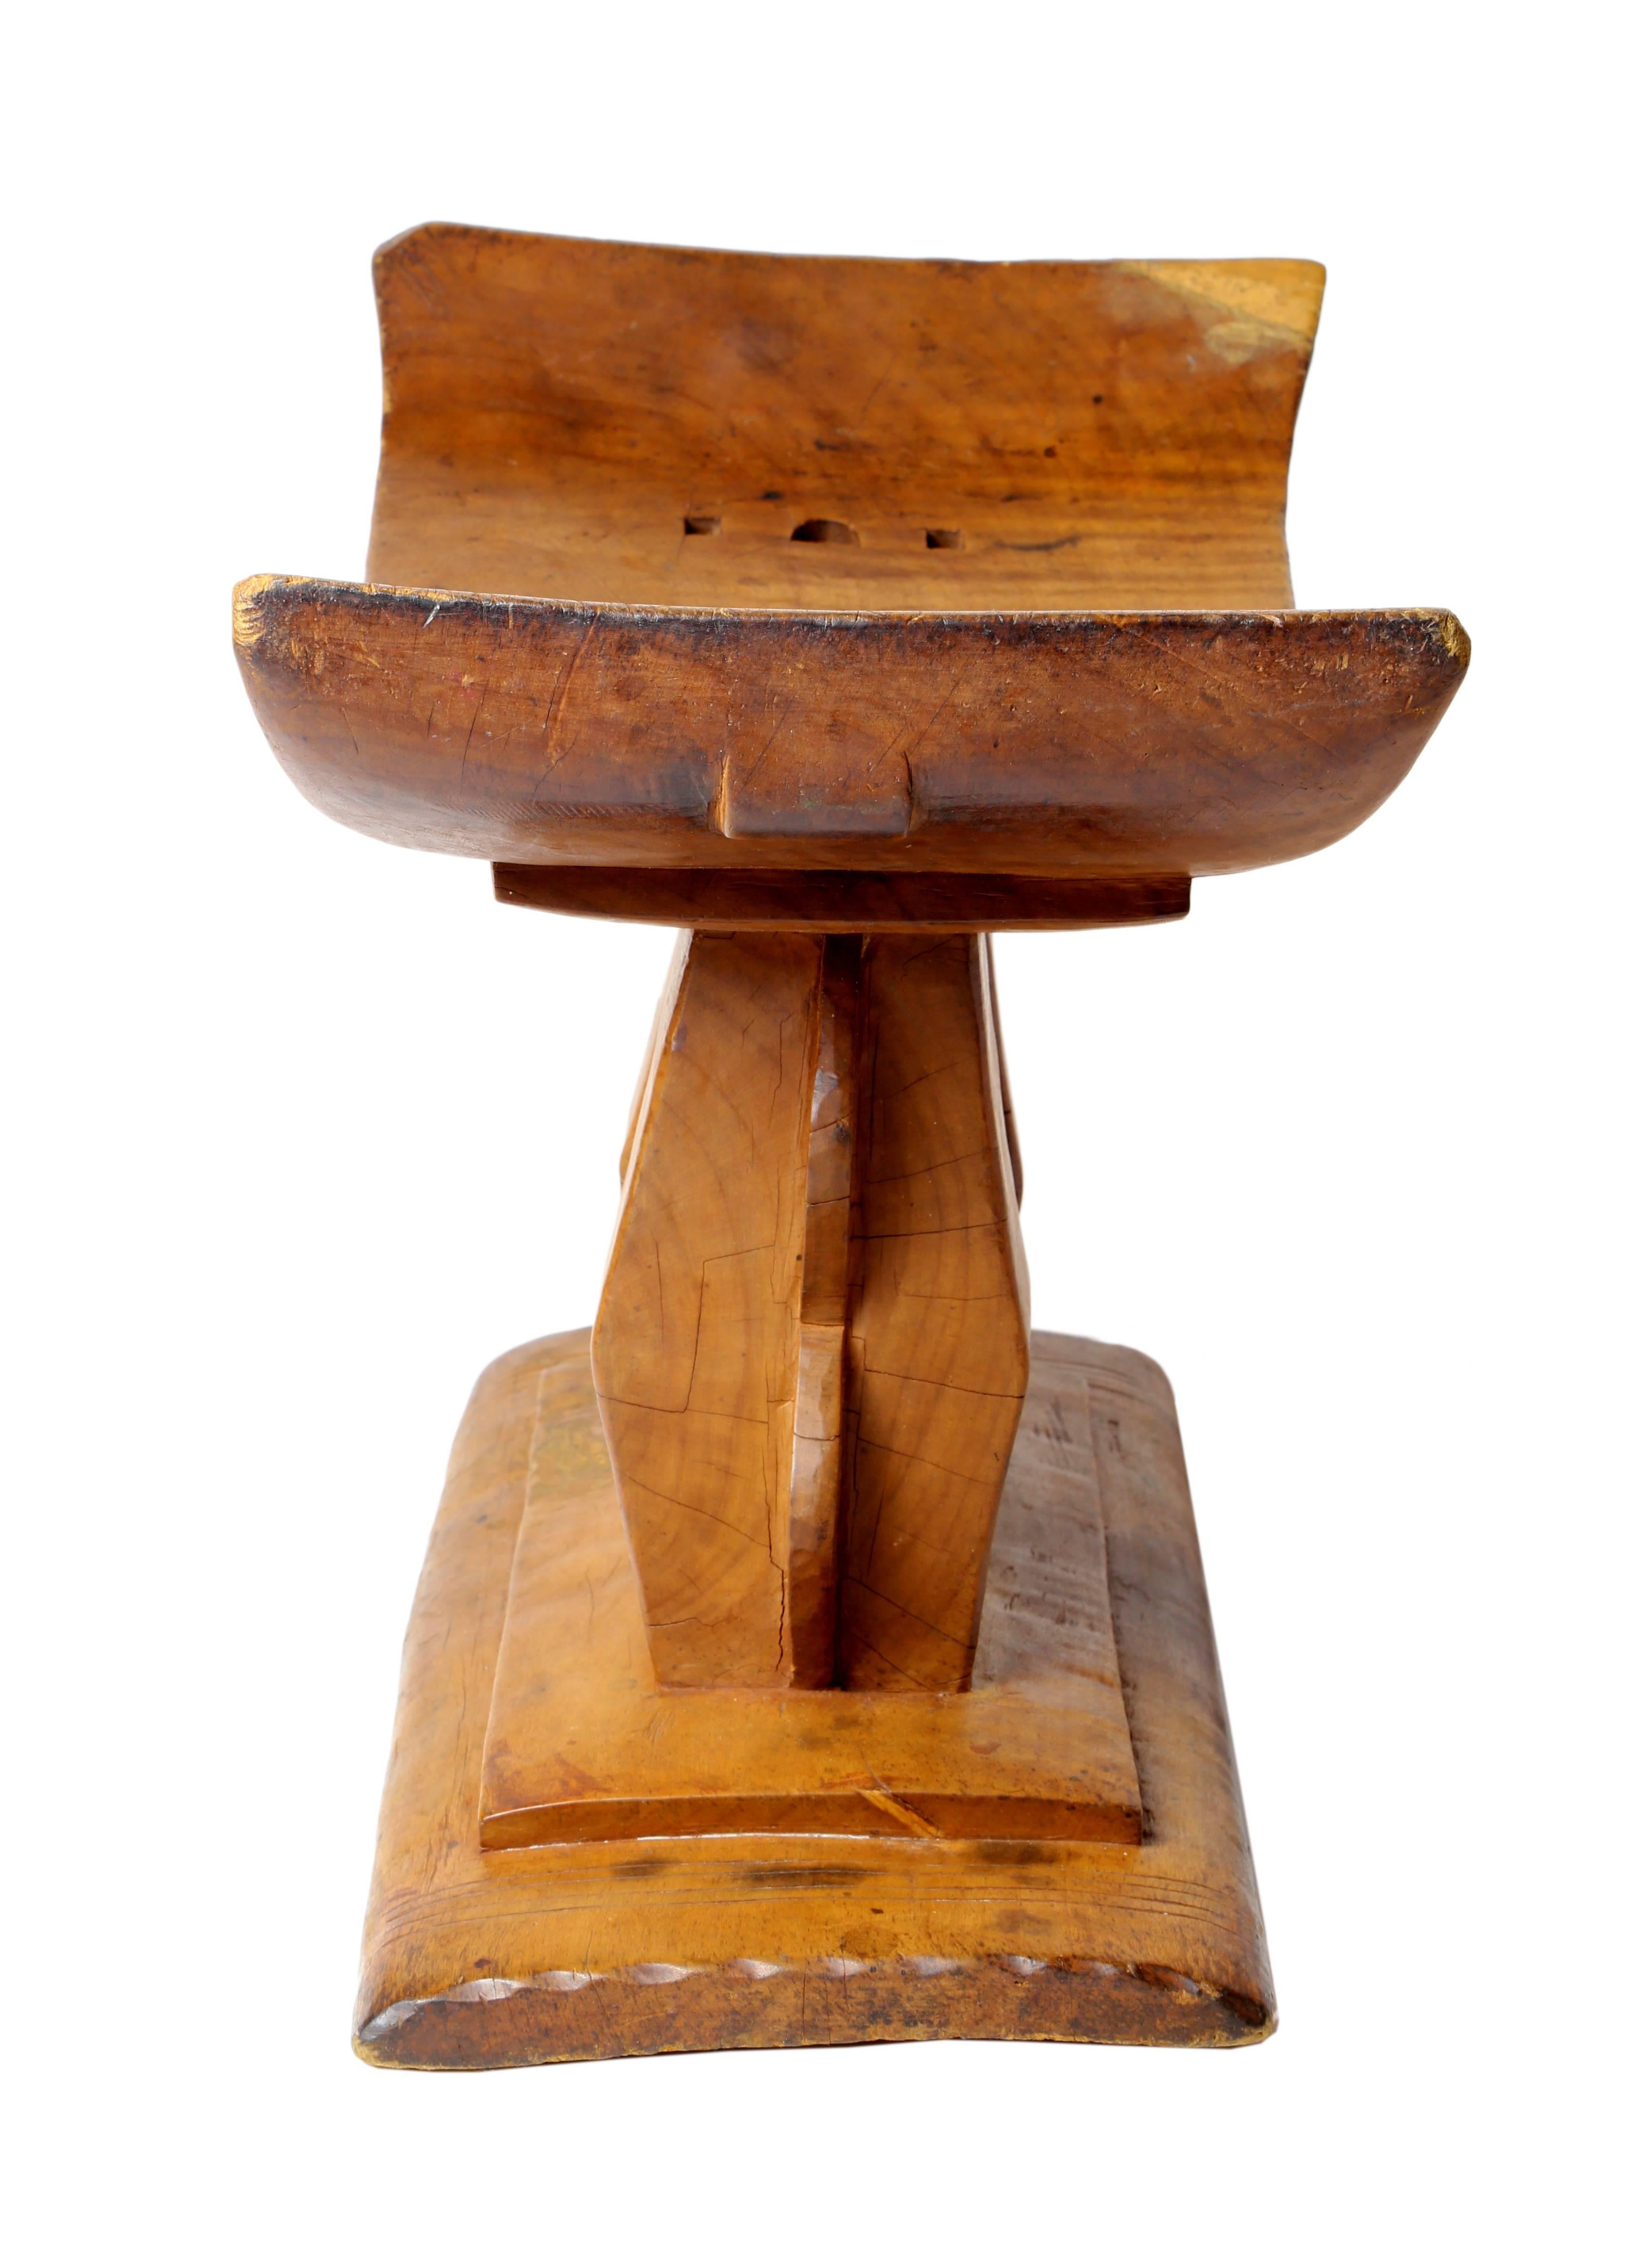 Carved from a single piece of wood, the African Ashanti head rest, Ghana, 20th century, has a curved top raised on two short pedestals rising form a stepped base.